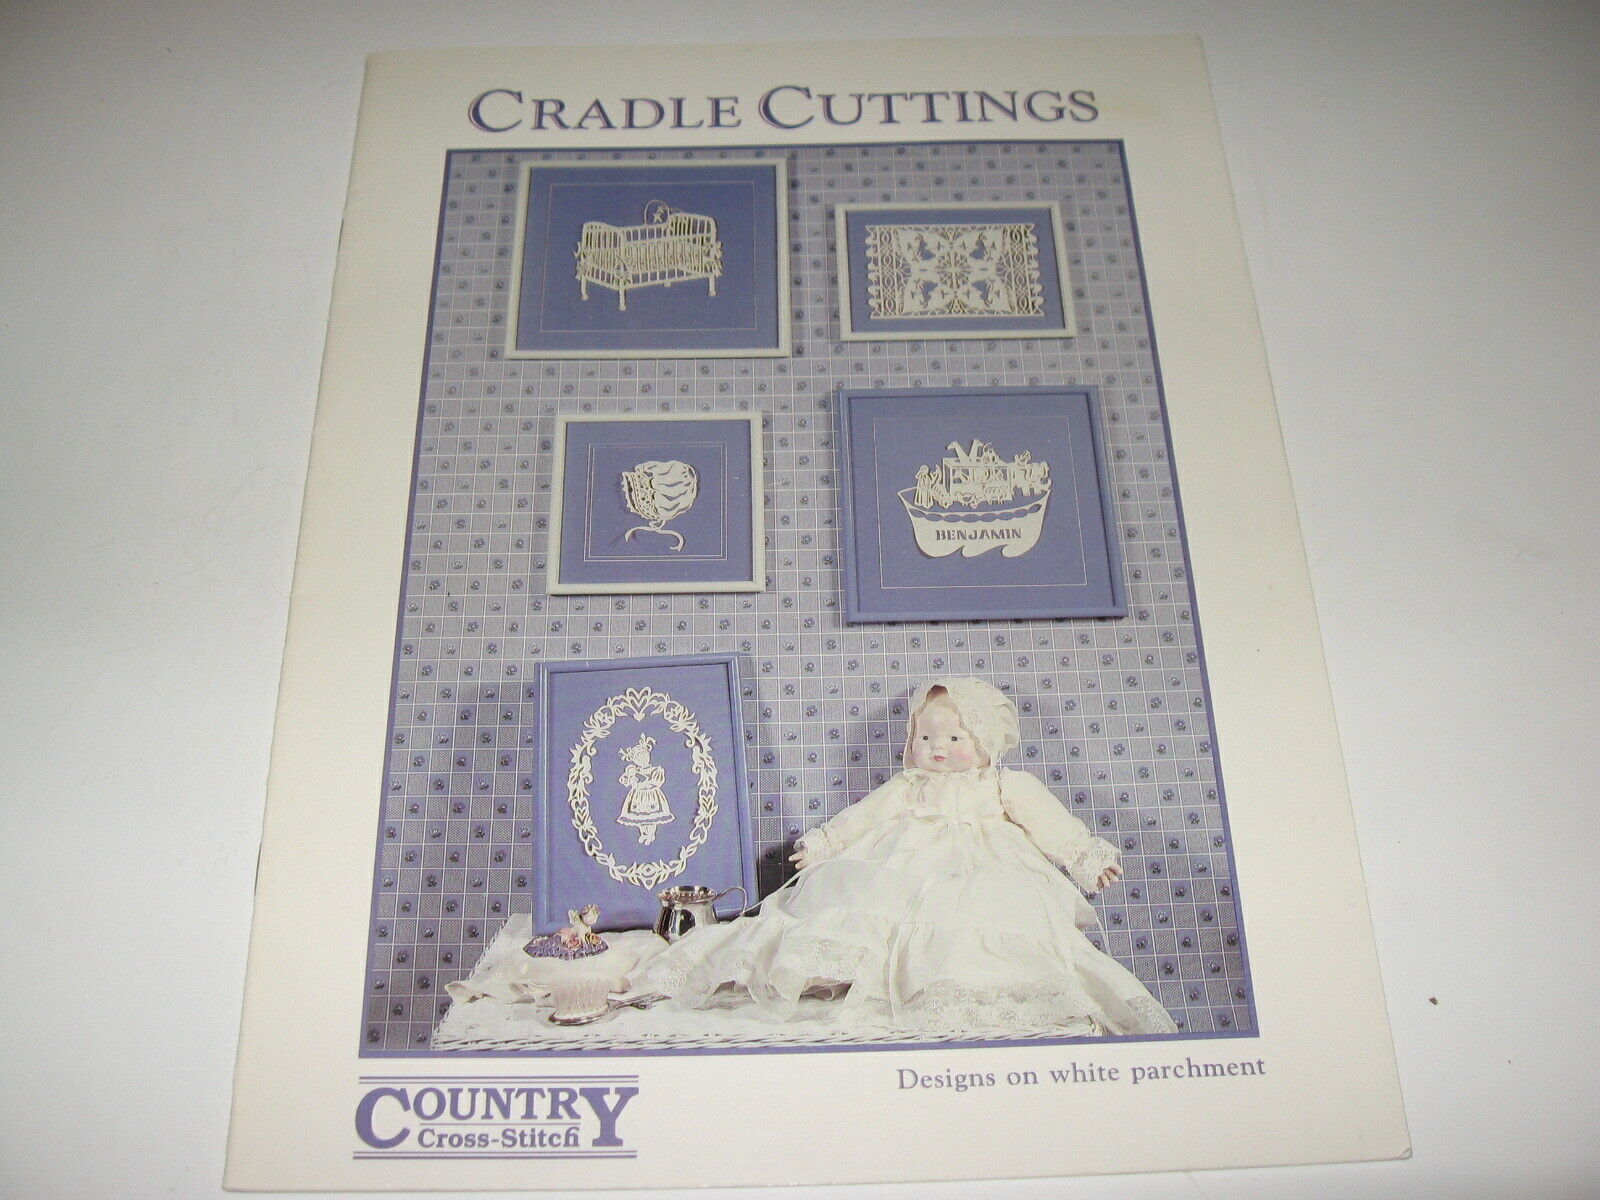 Cradle Cuttings Scherenschnitte Pattern Booklet Mary Munroe 1986 White Parchment